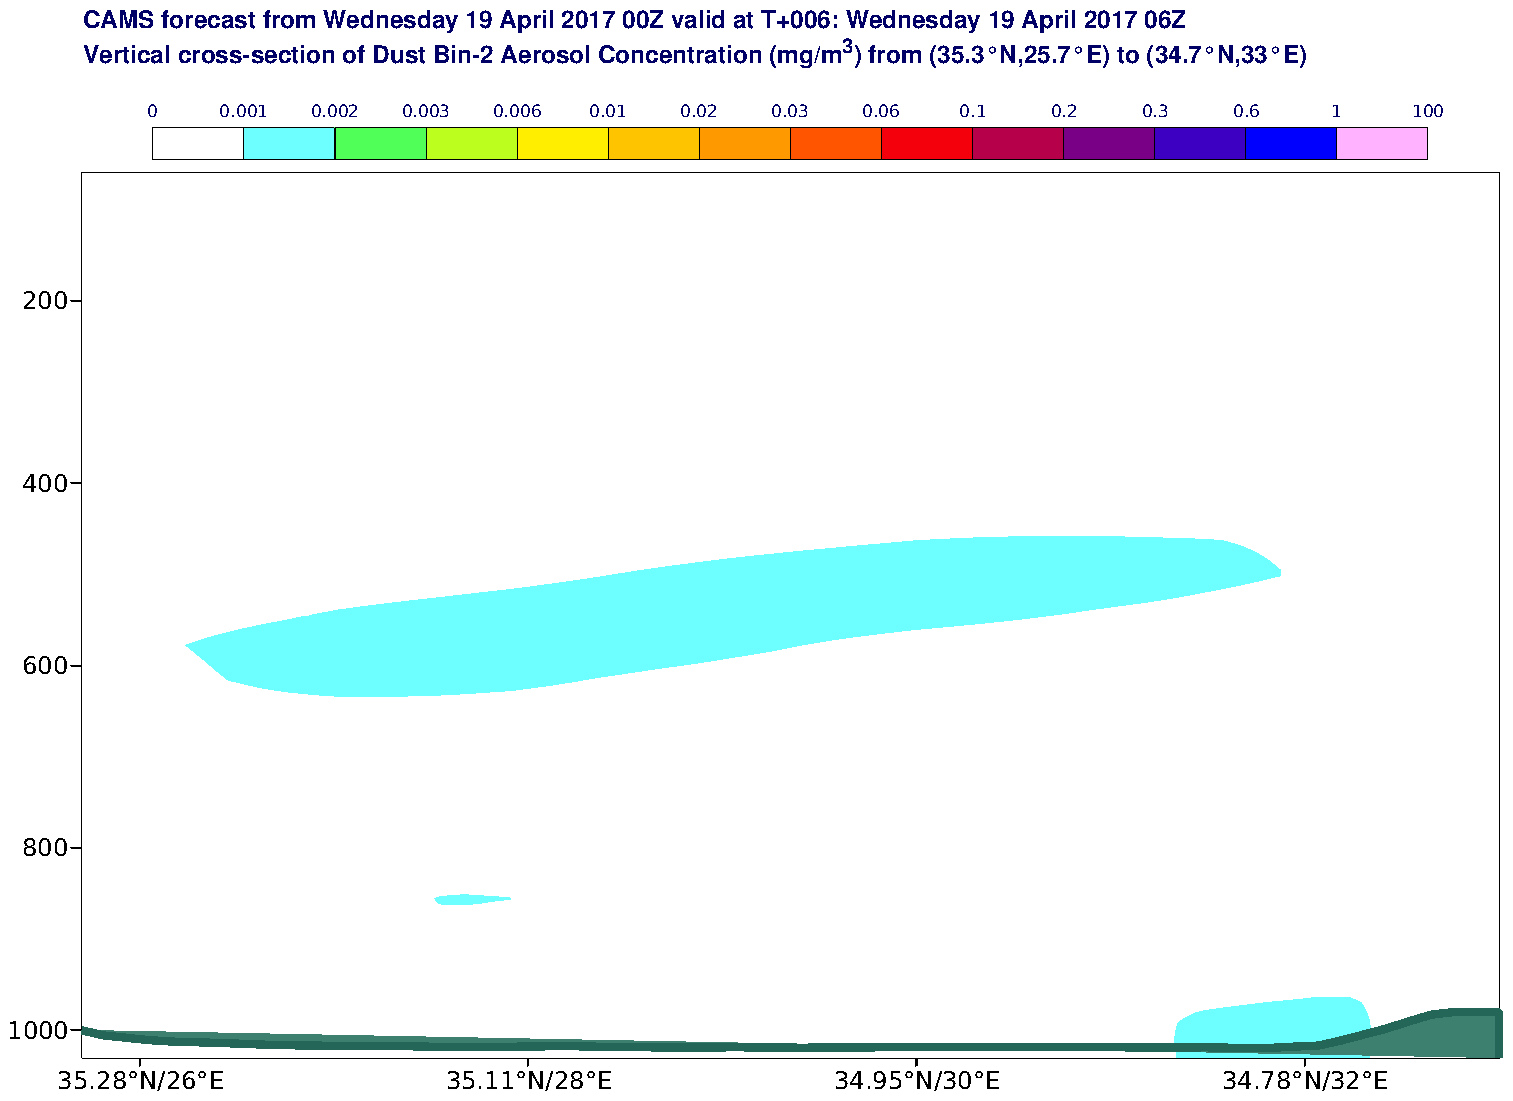 Vertical cross-section of Dust Bin-2 Aerosol Concentration (mg/m3) valid at T6 - 2017-04-19 06:00